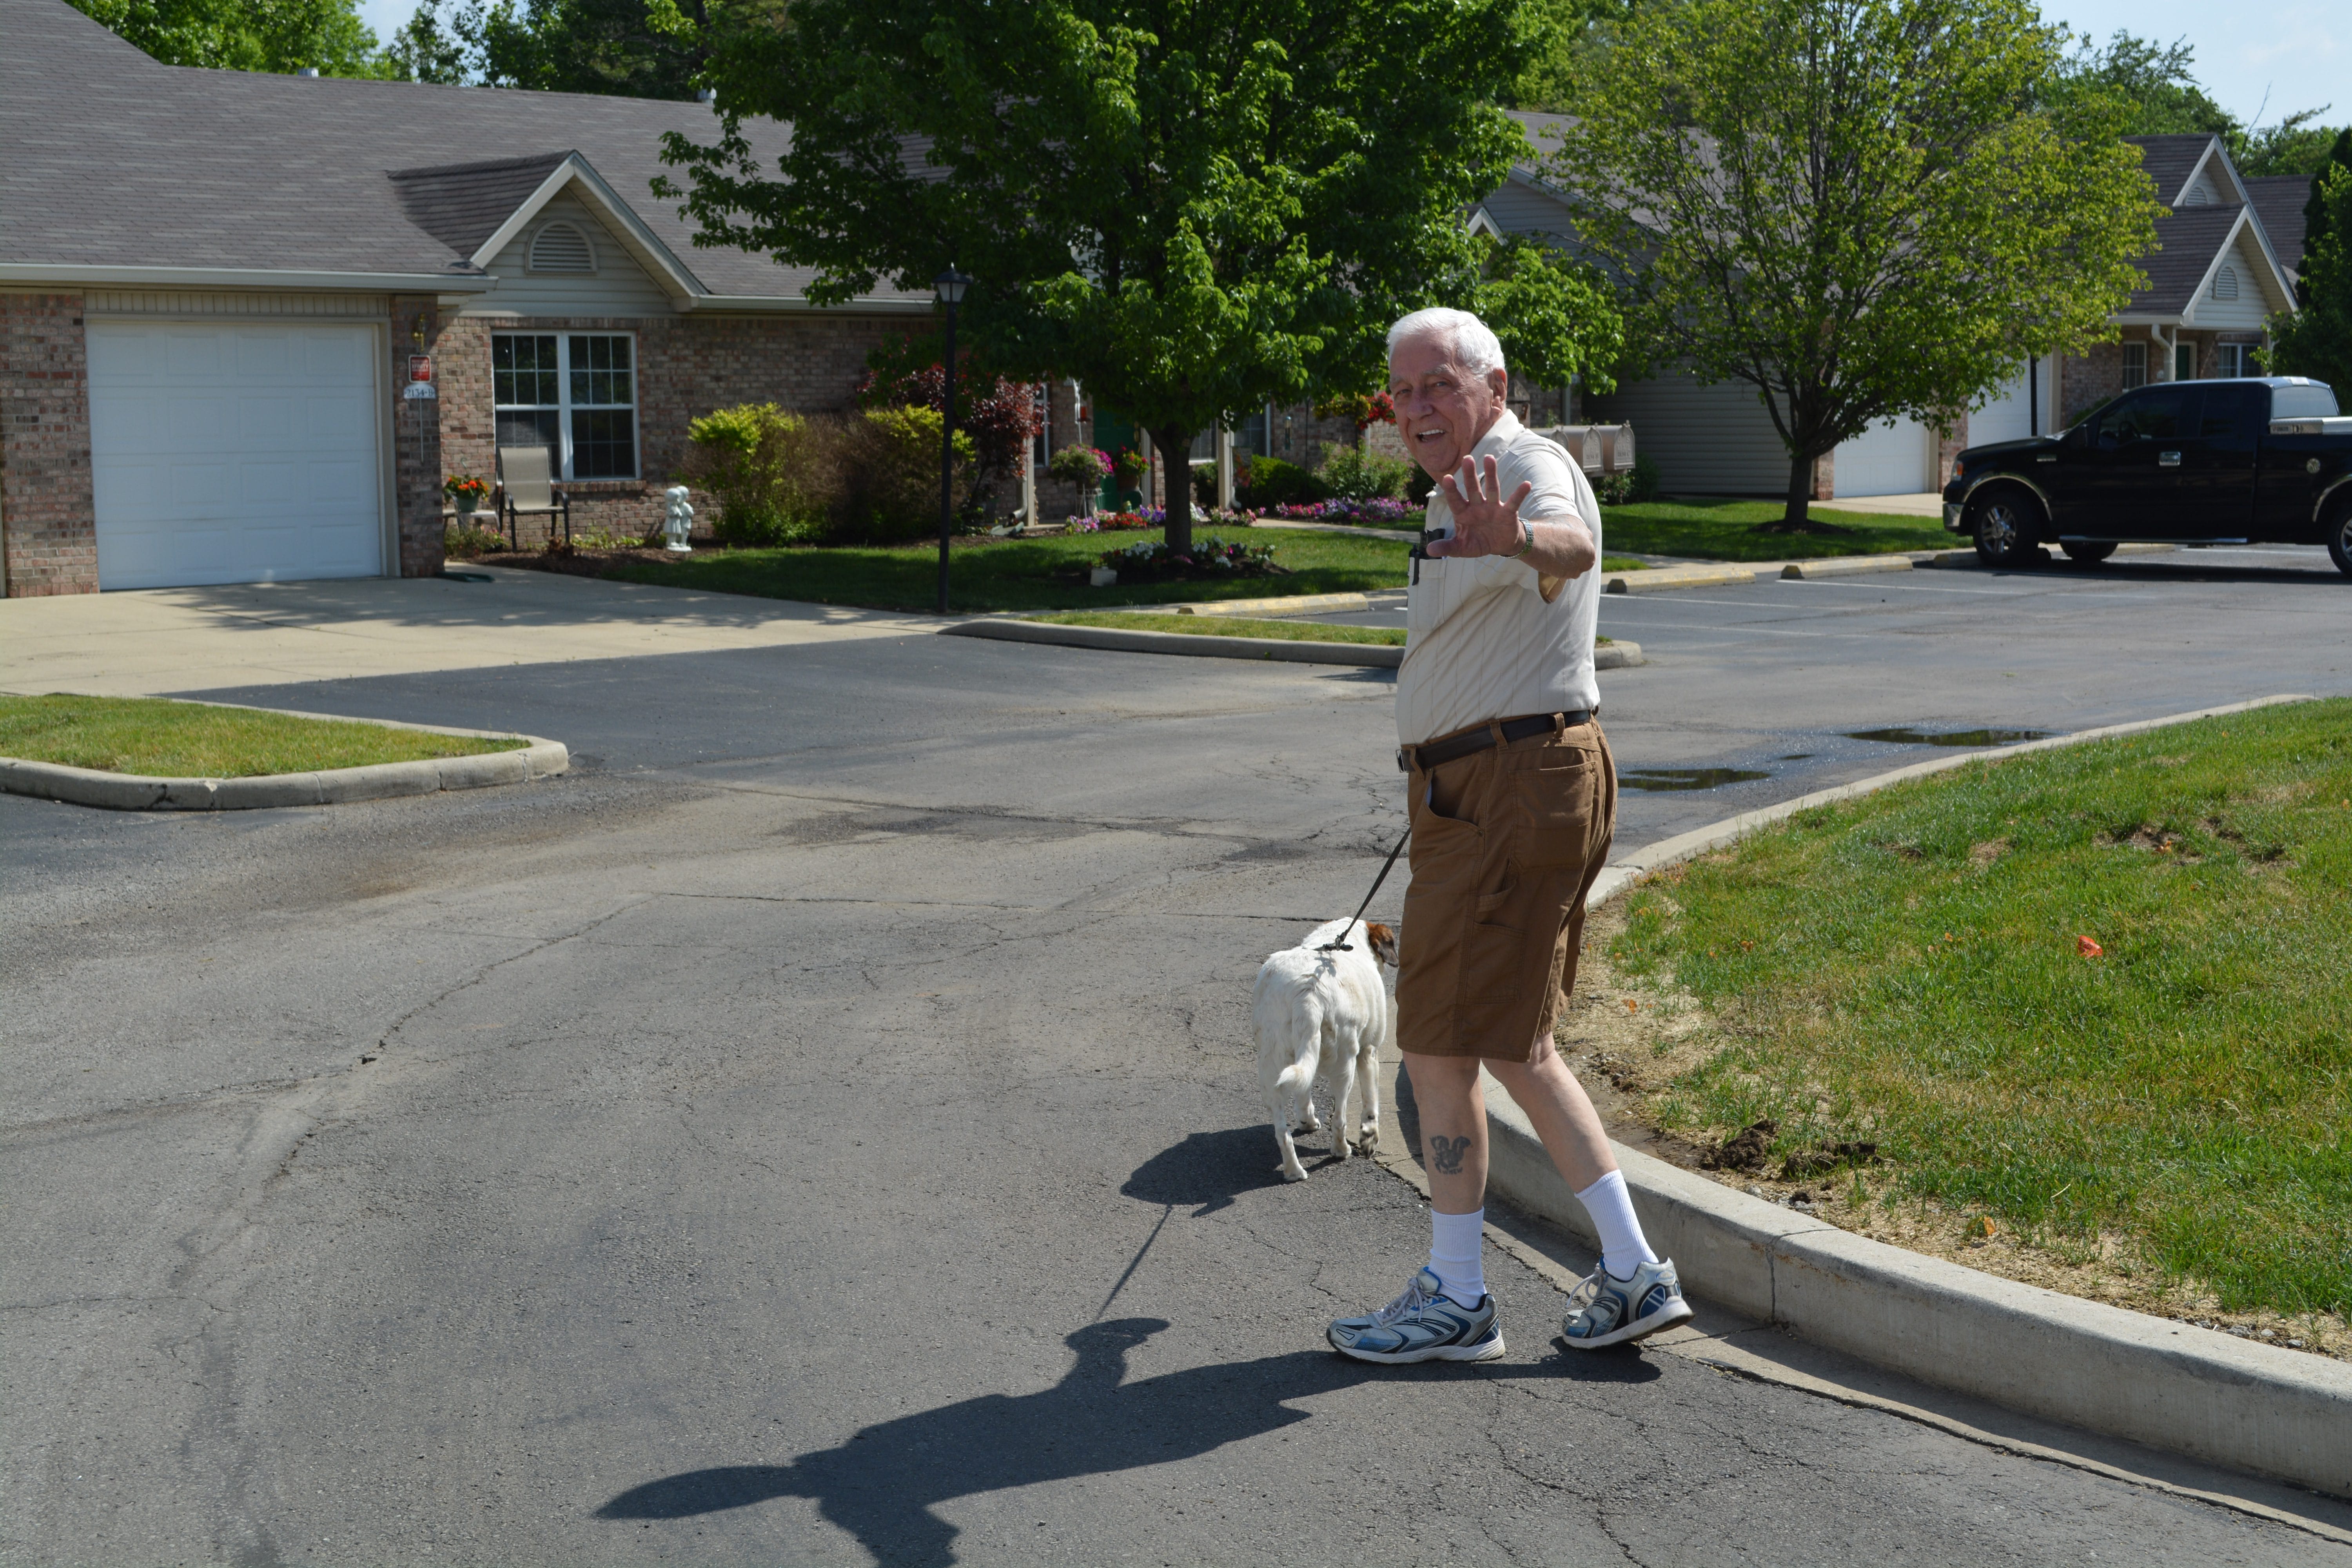 <span  class="uc_style_uc_tiles_grid_image_elementor_uc_items_attribute_title" style="color:#000000;">Resident walking his dog along the Spring Mill Meadows community</span>